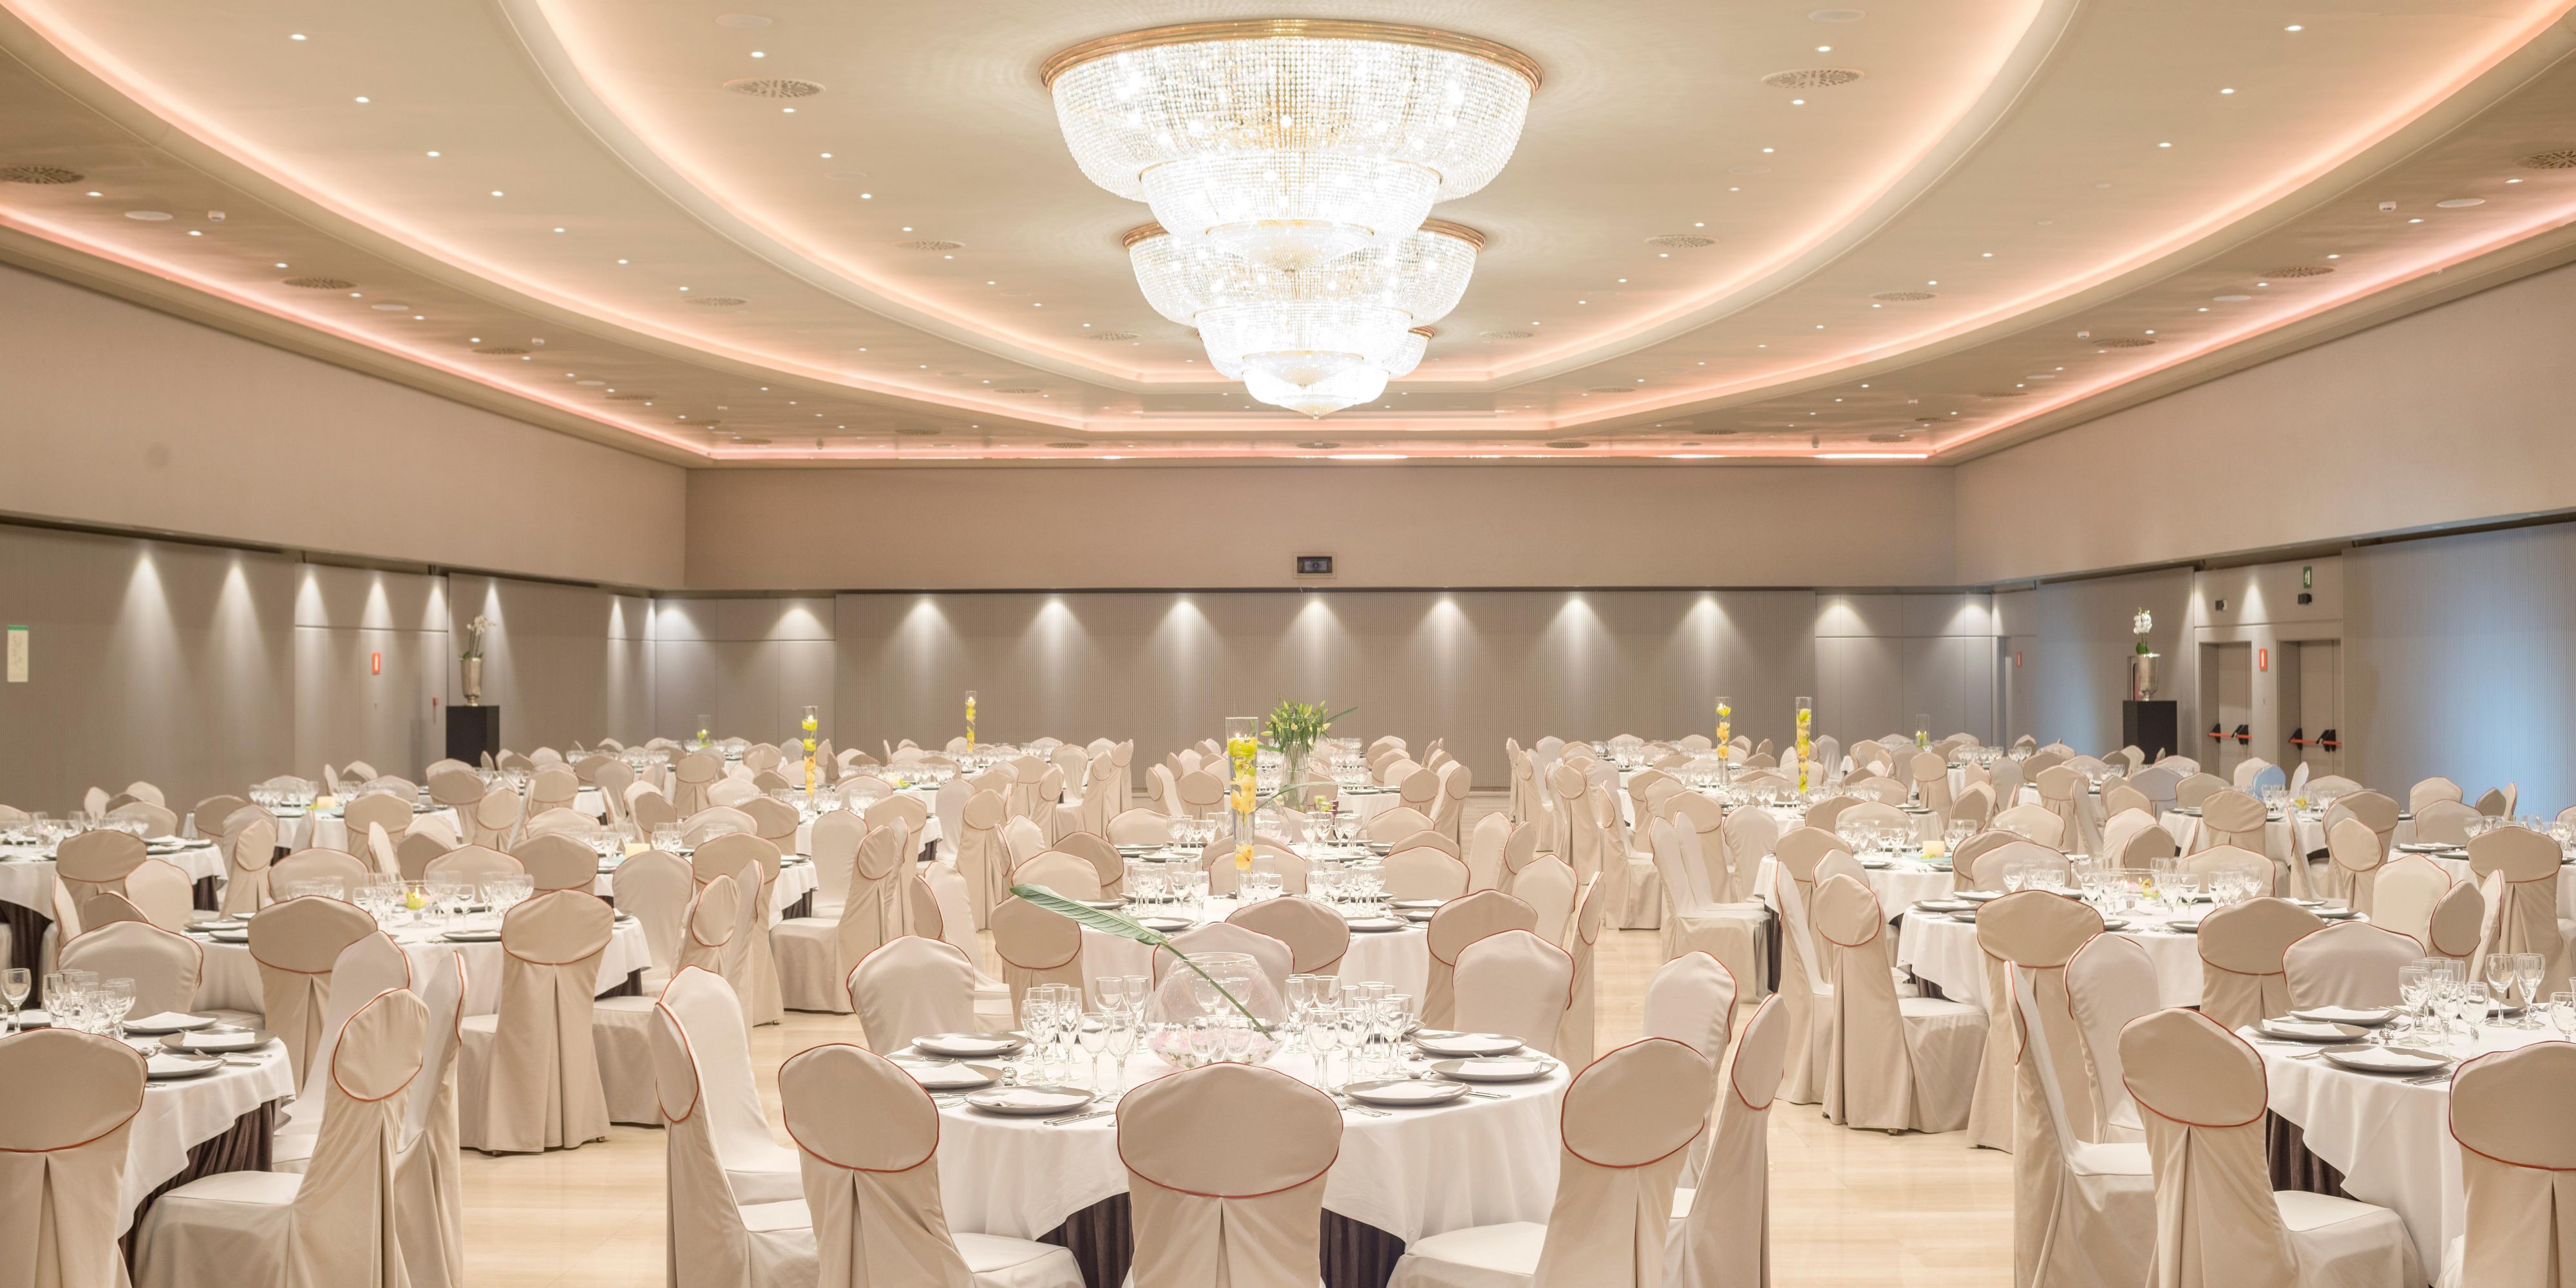 We offer the space to experience the city's vibrant lifestyle and culture. With more than 3,000 square metres of event space, our distinct venues can hold up to 1,000 guests in theater style event, 600 seated for a gala dinner and a large exhibition foyer. Let our experienced team plan the perfect event with you.